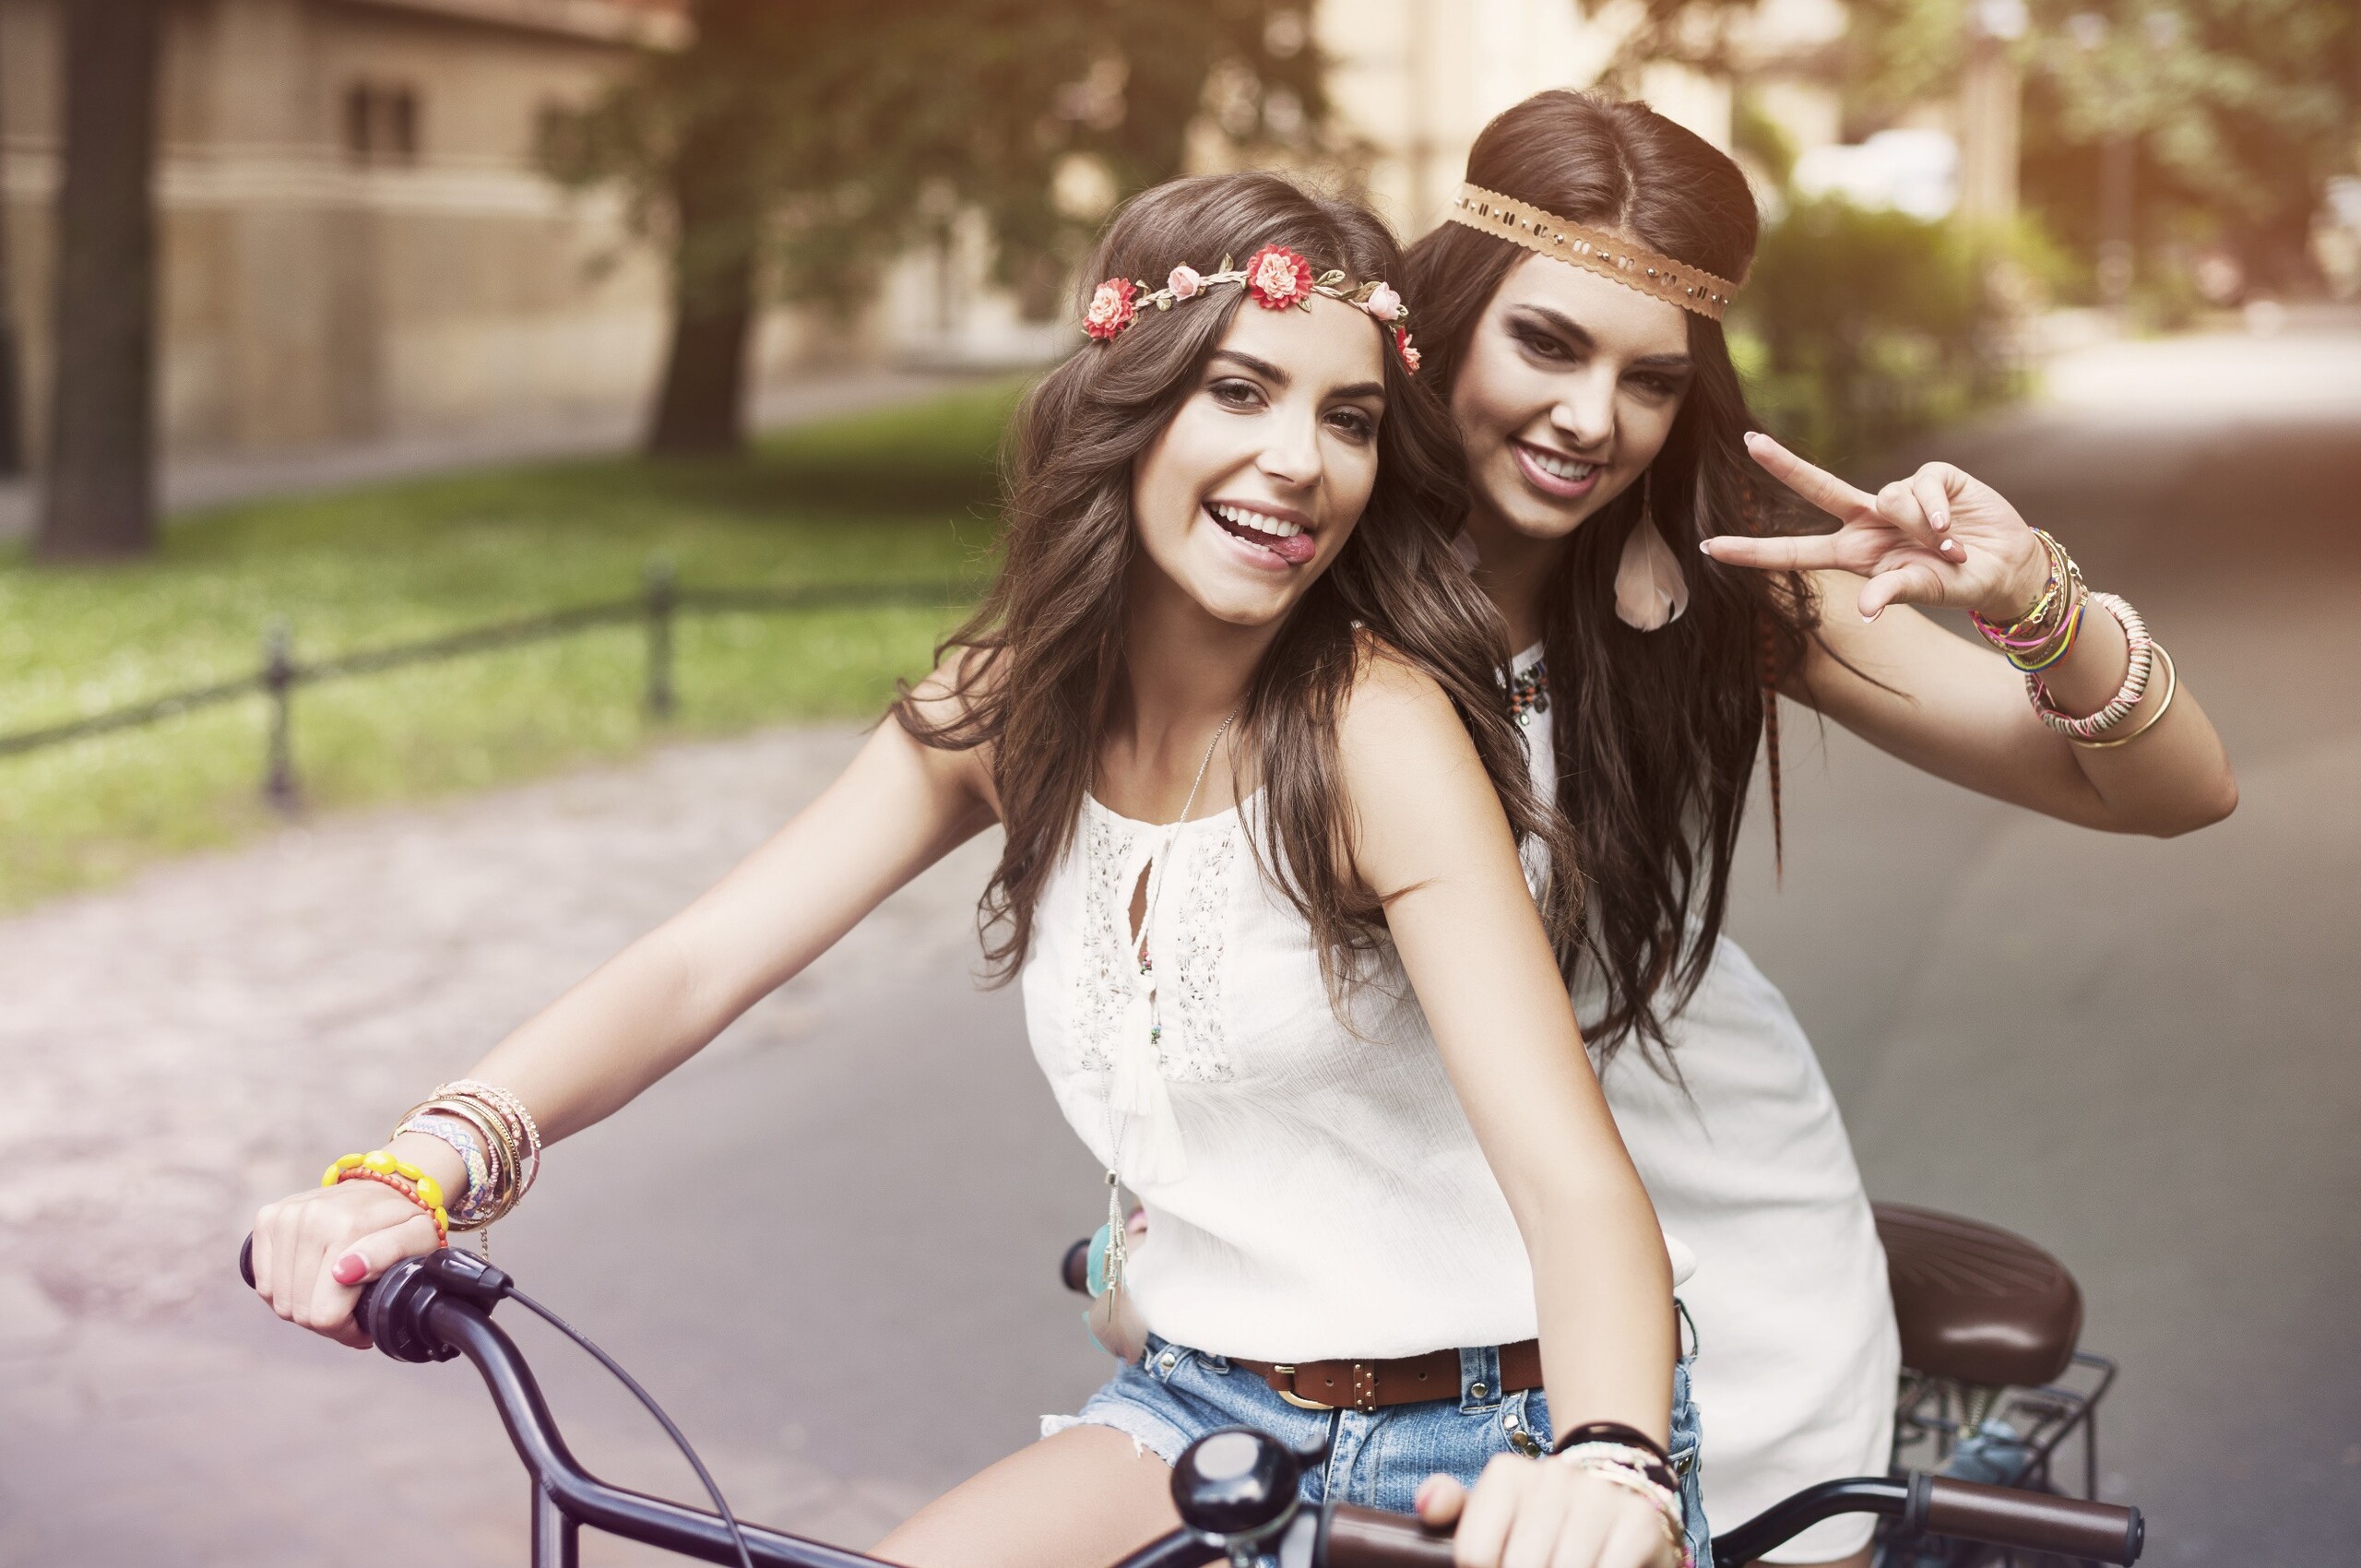 Girls on Cycle In 2560x1700 Resolution. girls-on-cycle.jpg. 